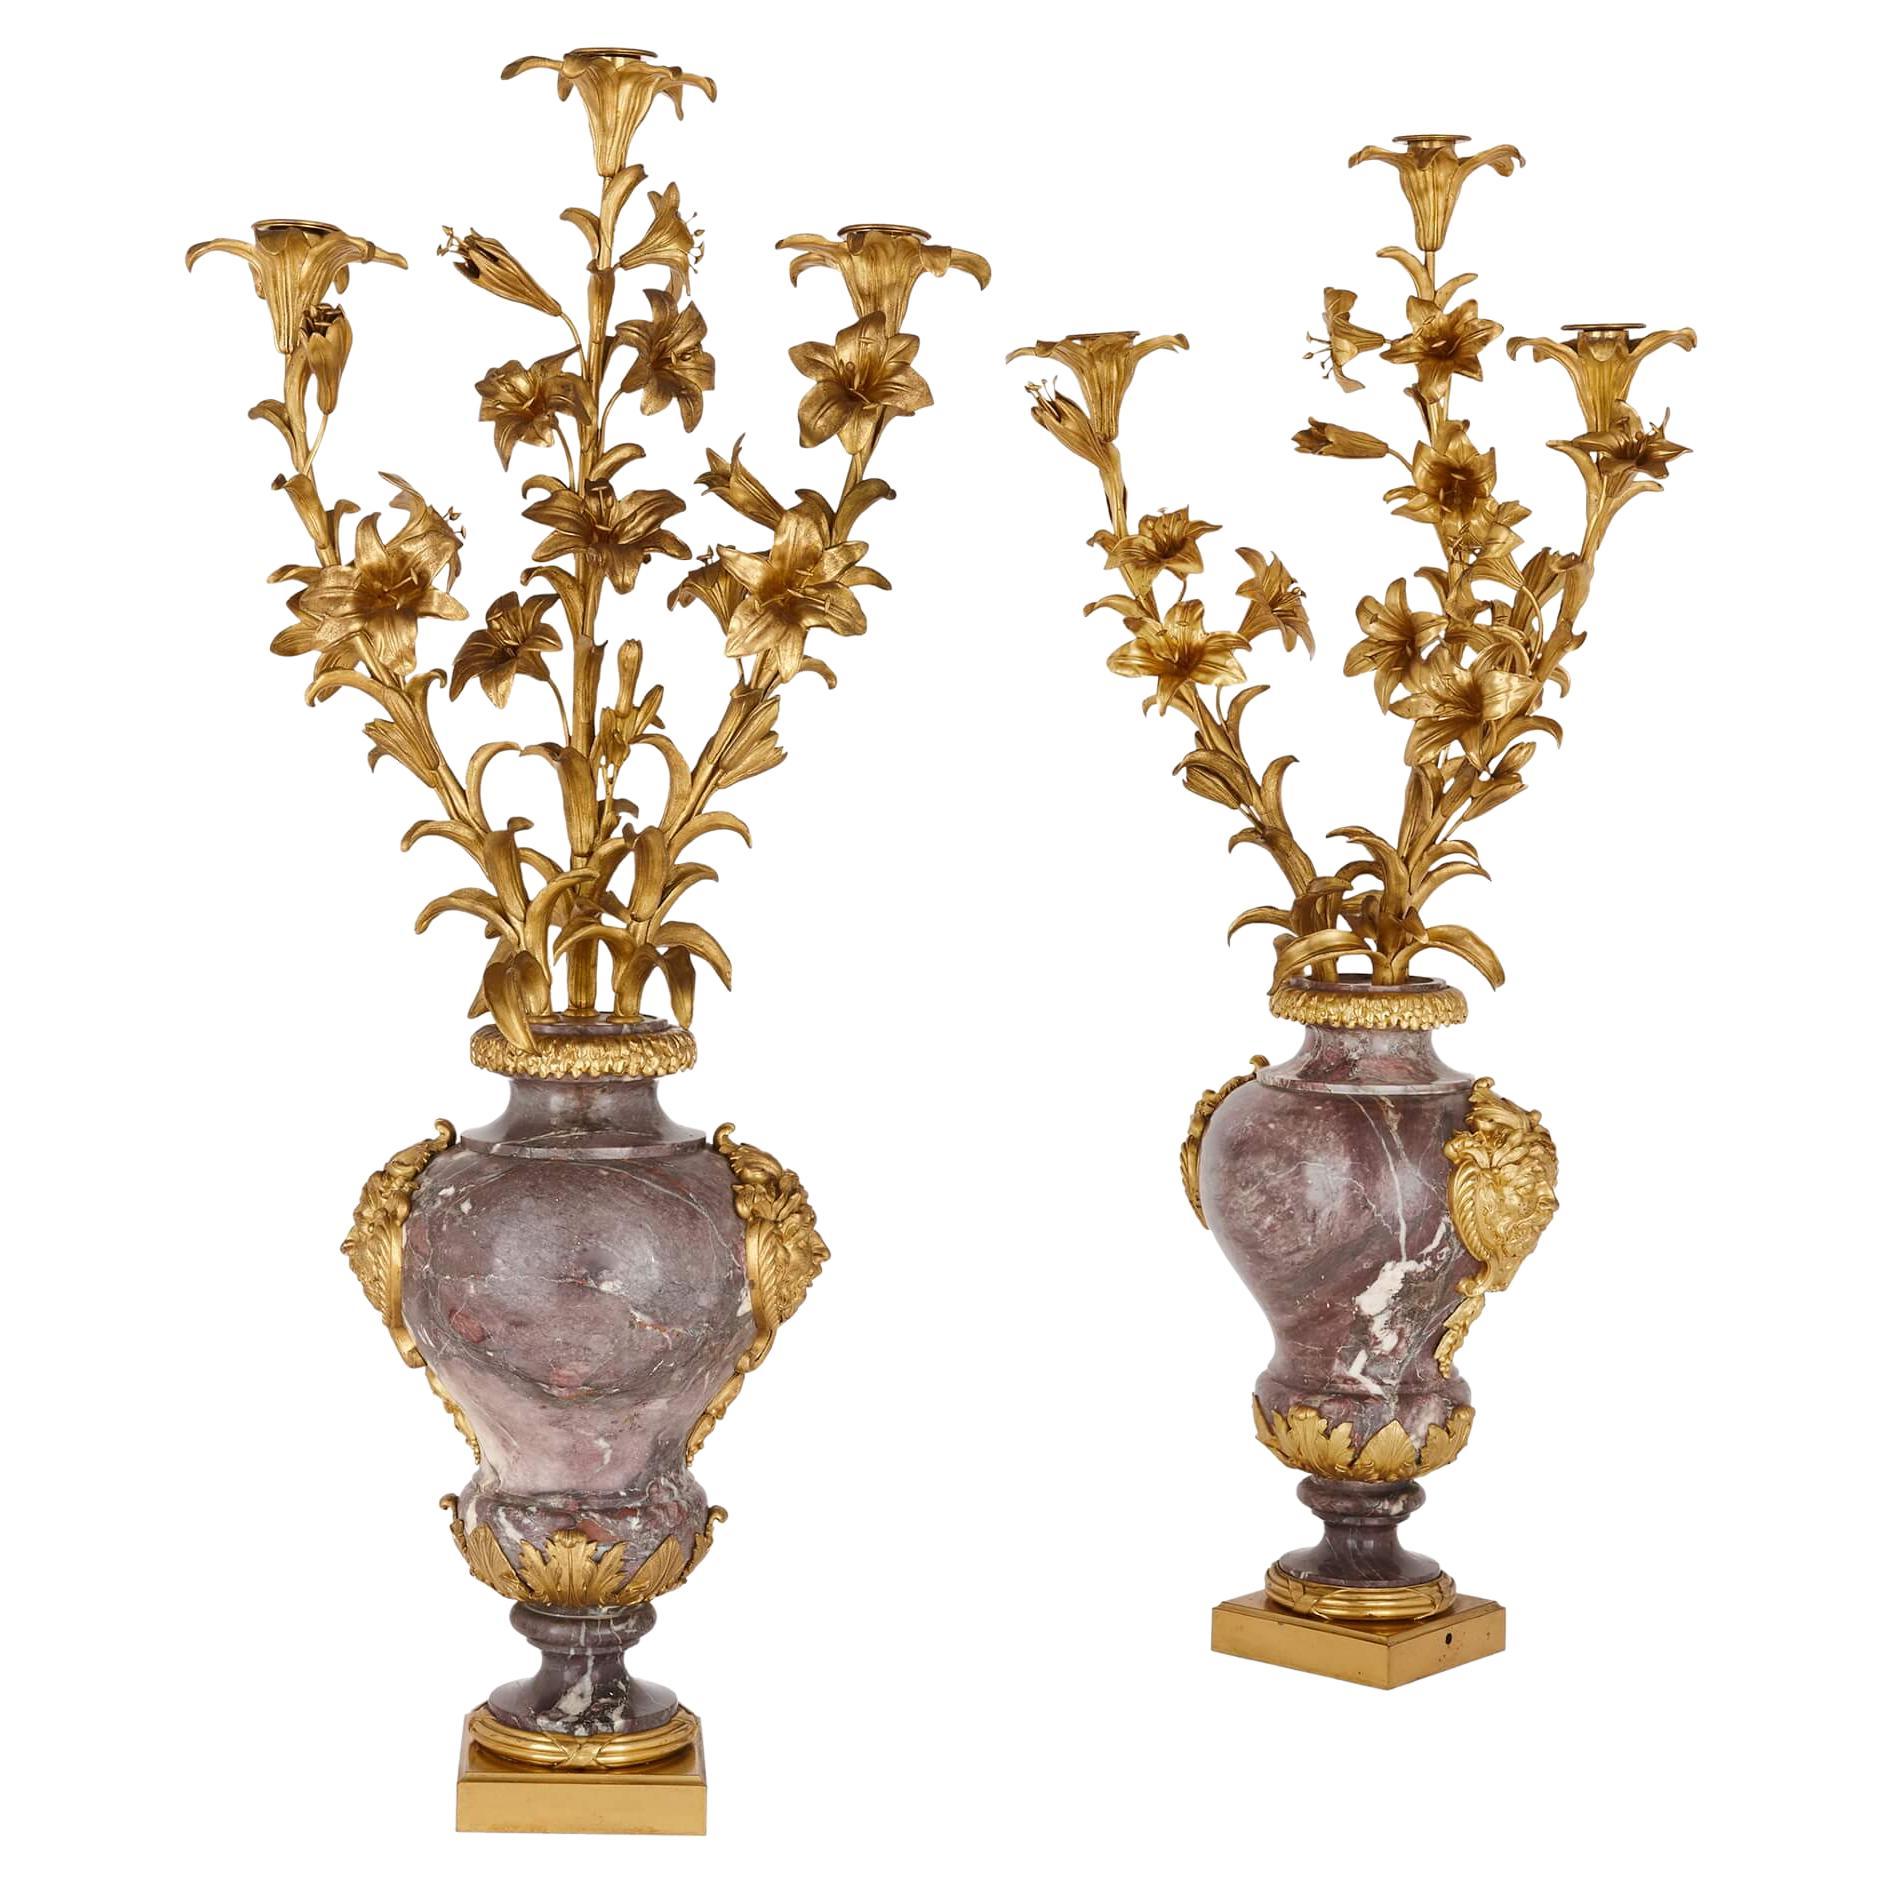 Pair of Large Rococo Style Gilt-Bronze and Marble Candelabra For Sale